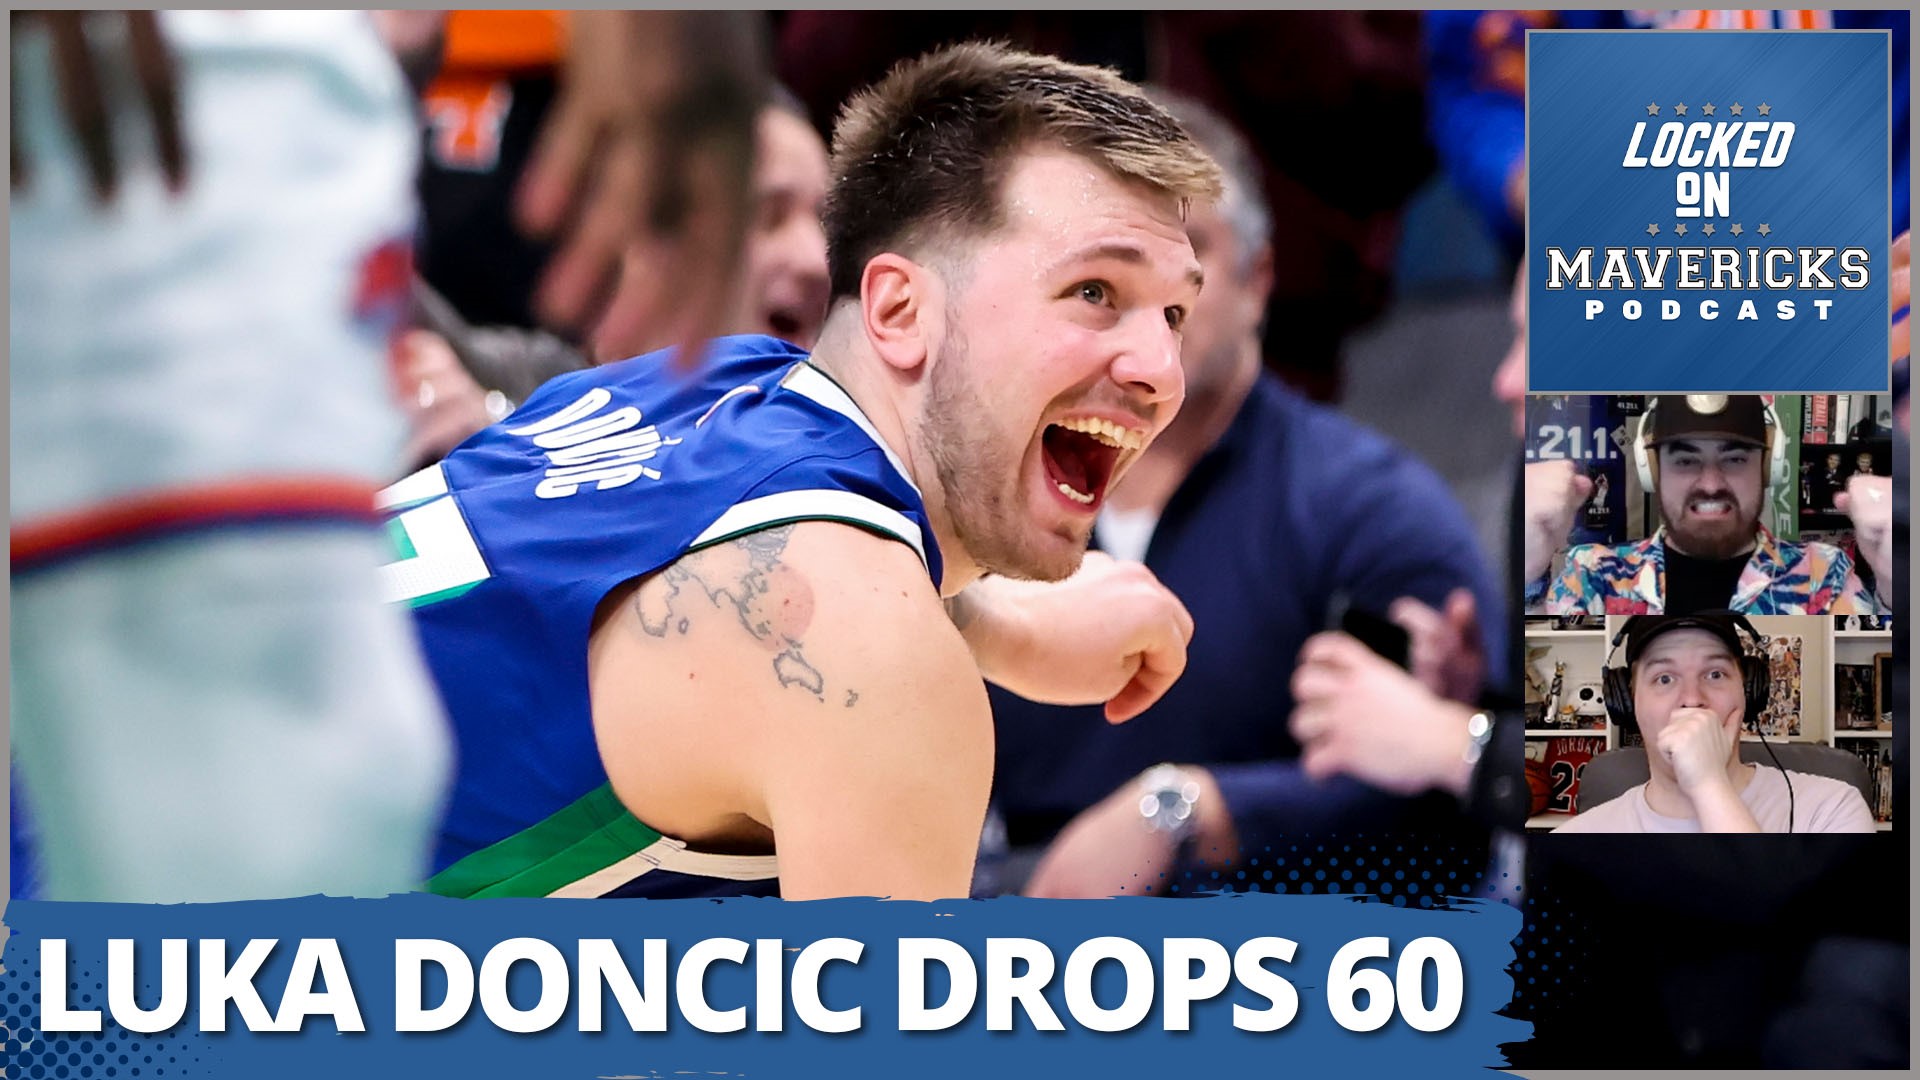 Nick Angstadt & Isaac Harris breakdown the Mavs win over the Knicks and how Luka took over and beat the Knicks.